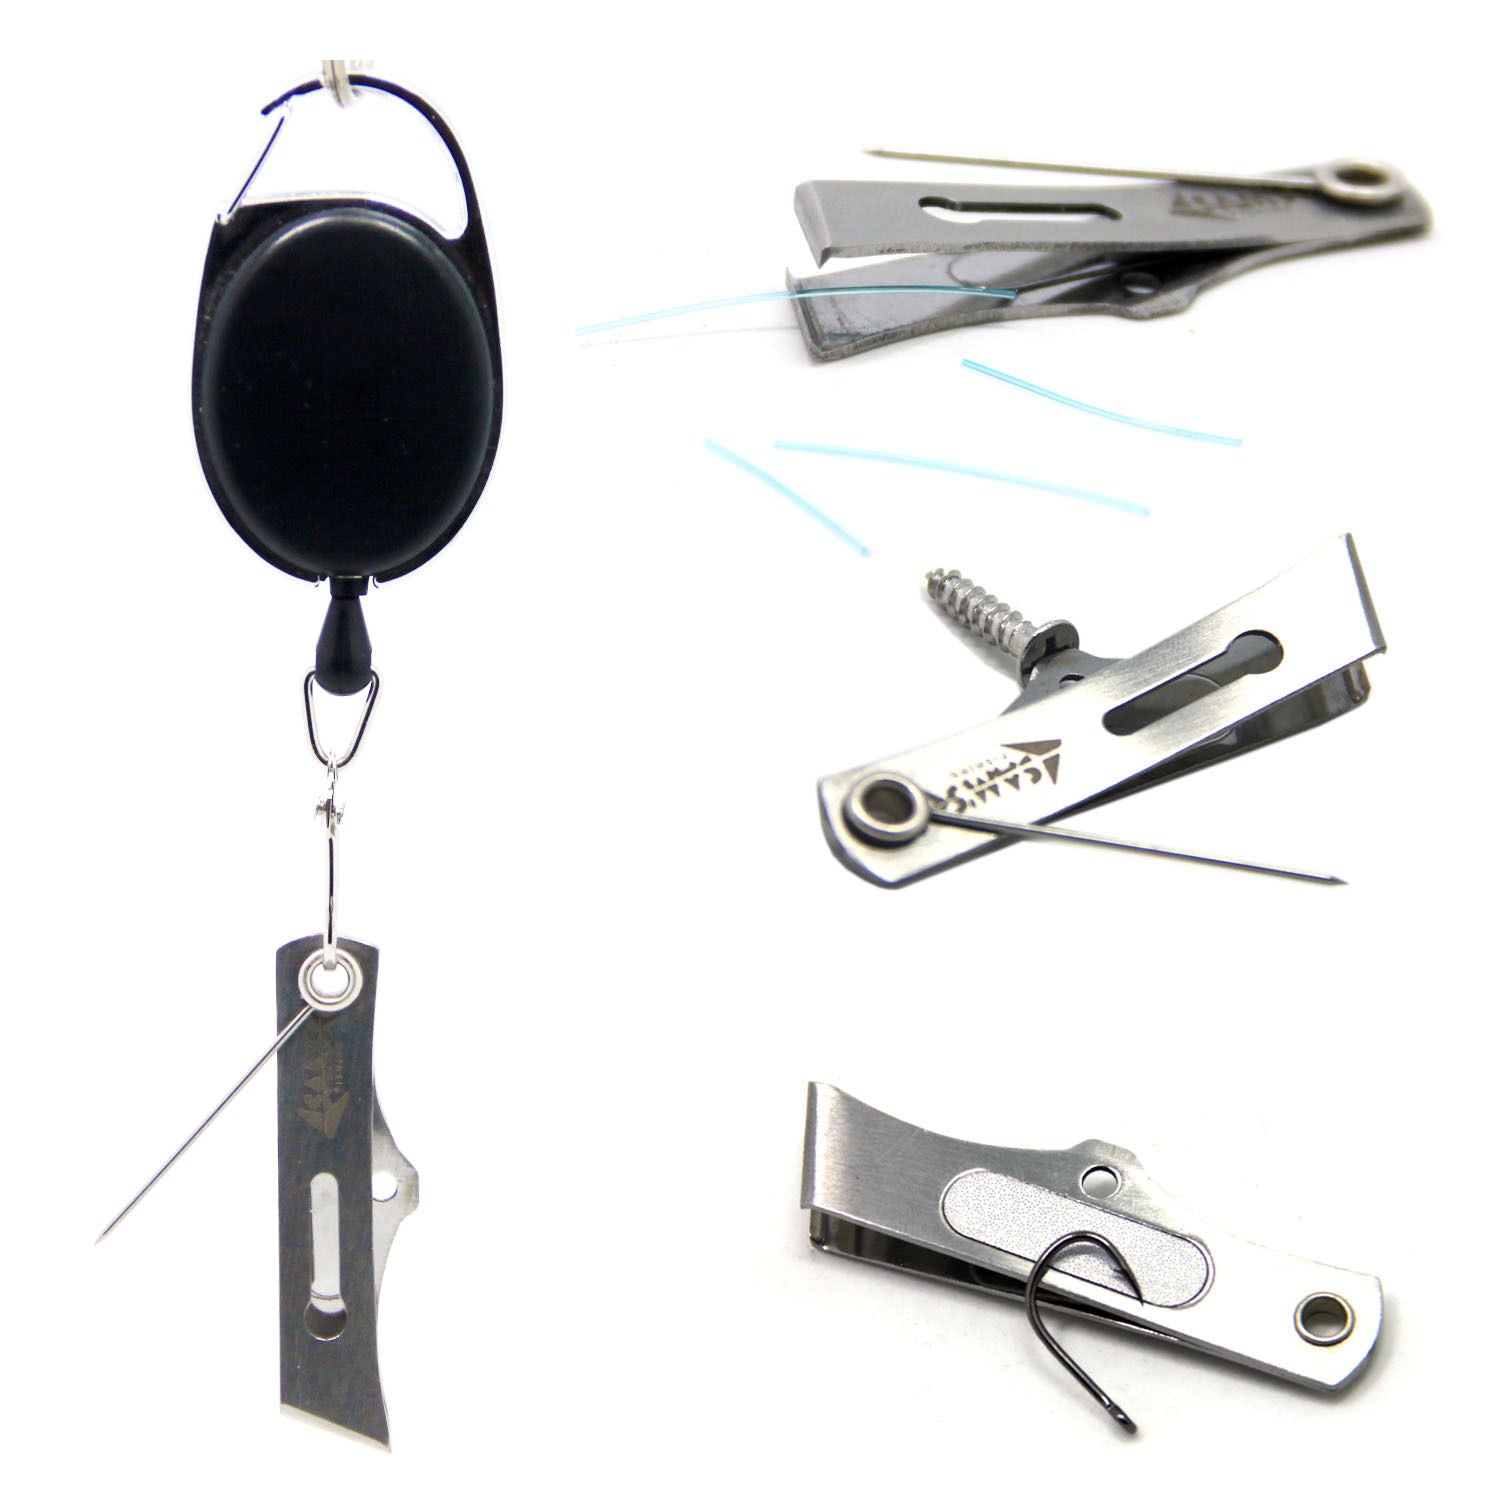 Fishing quick knot tools stainless steel pliers nipper line cutter clipper  hook eye cleaner hook sharpener fly tying tool tackle